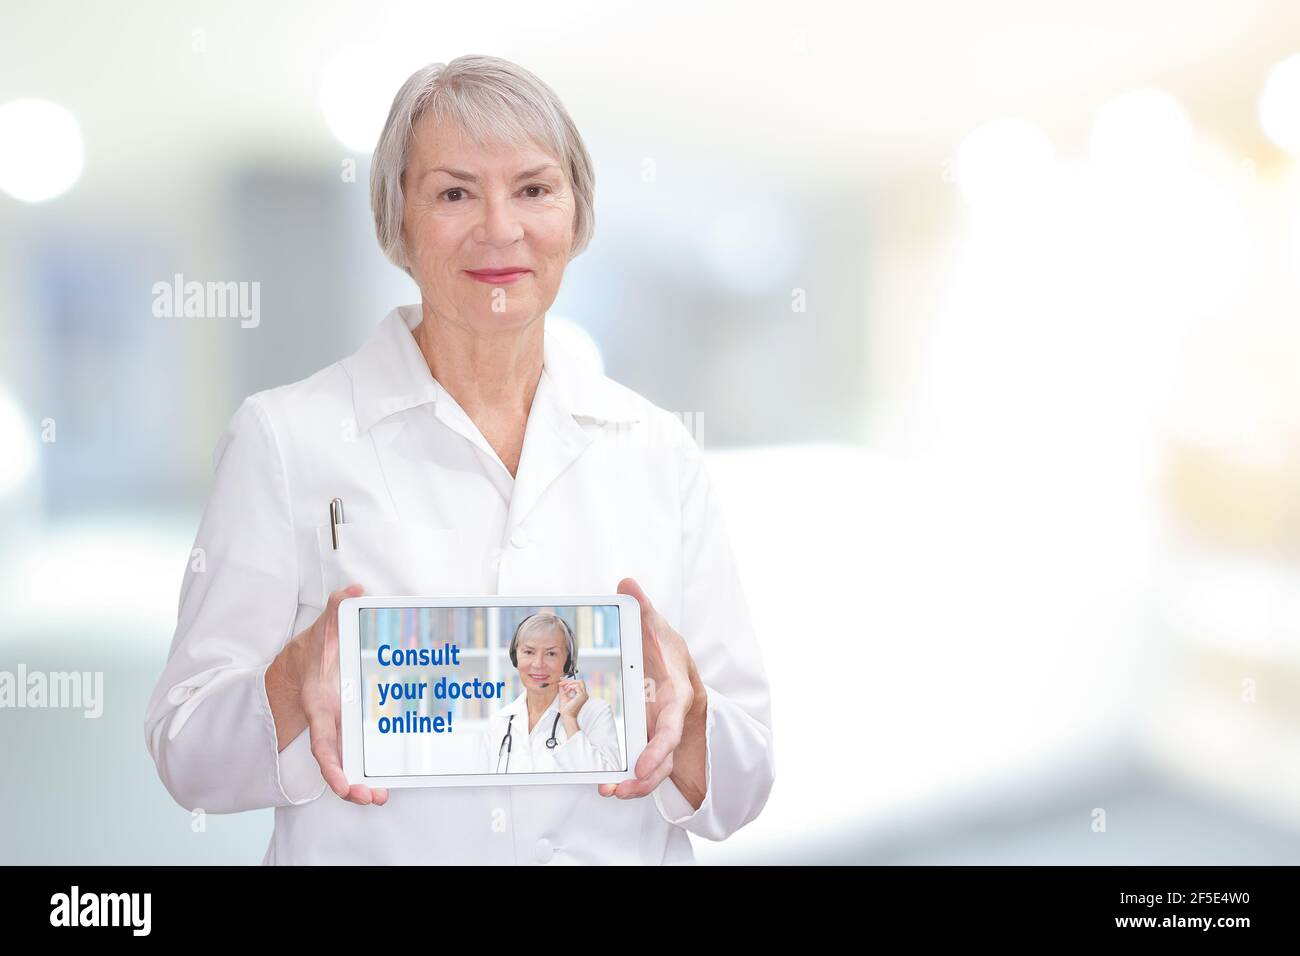 Friendly senior doctor showing a tablet computer with the text: consult your doctor online, copy space. Stock Photo